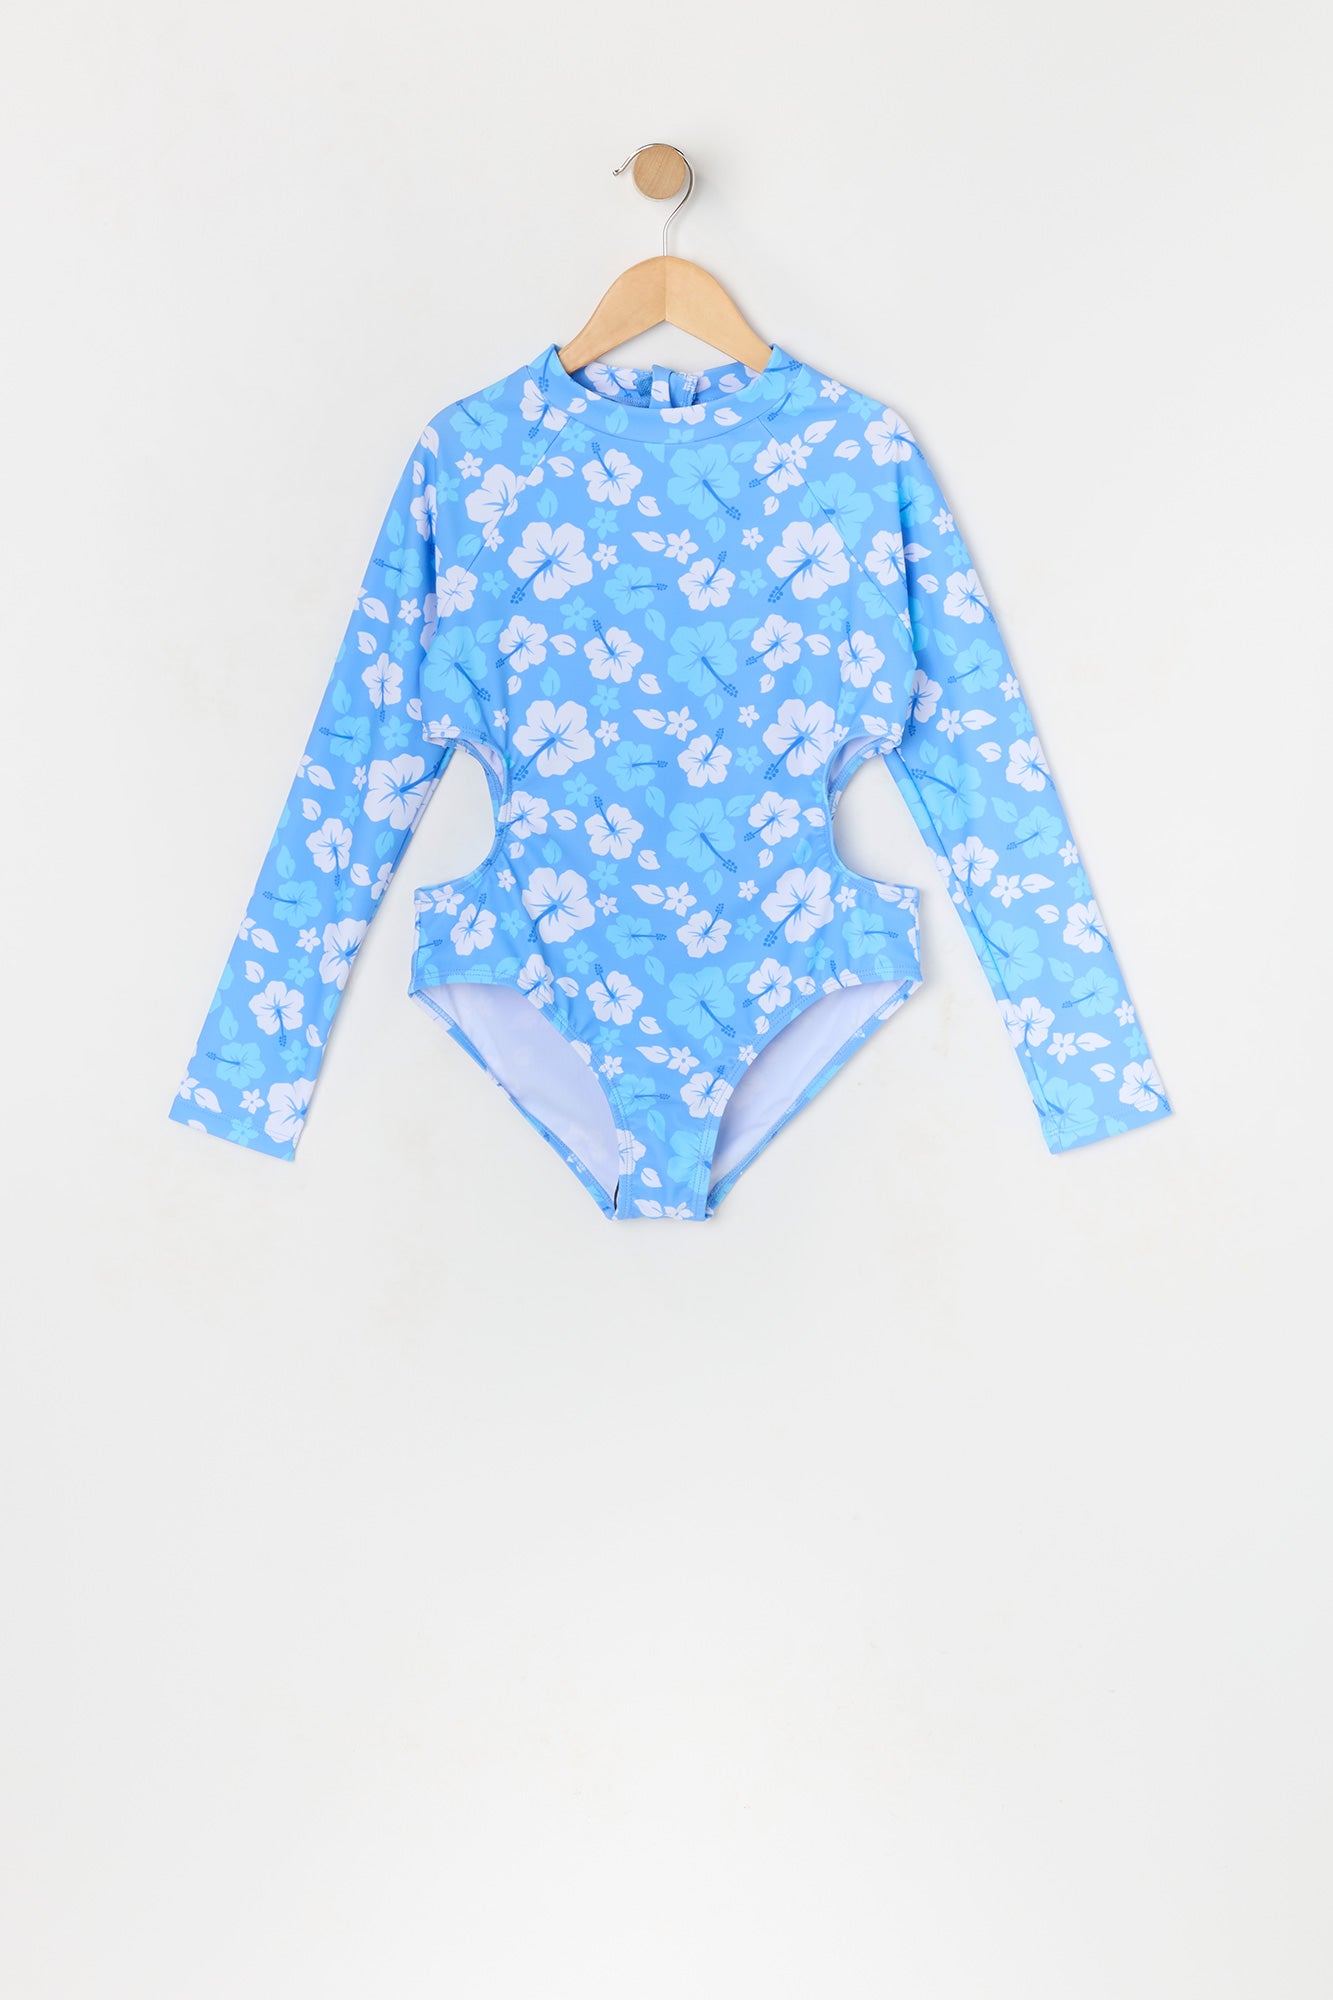 Girls Mermaid Print Long Sleeve One Piece Swimsuit with built-in cups